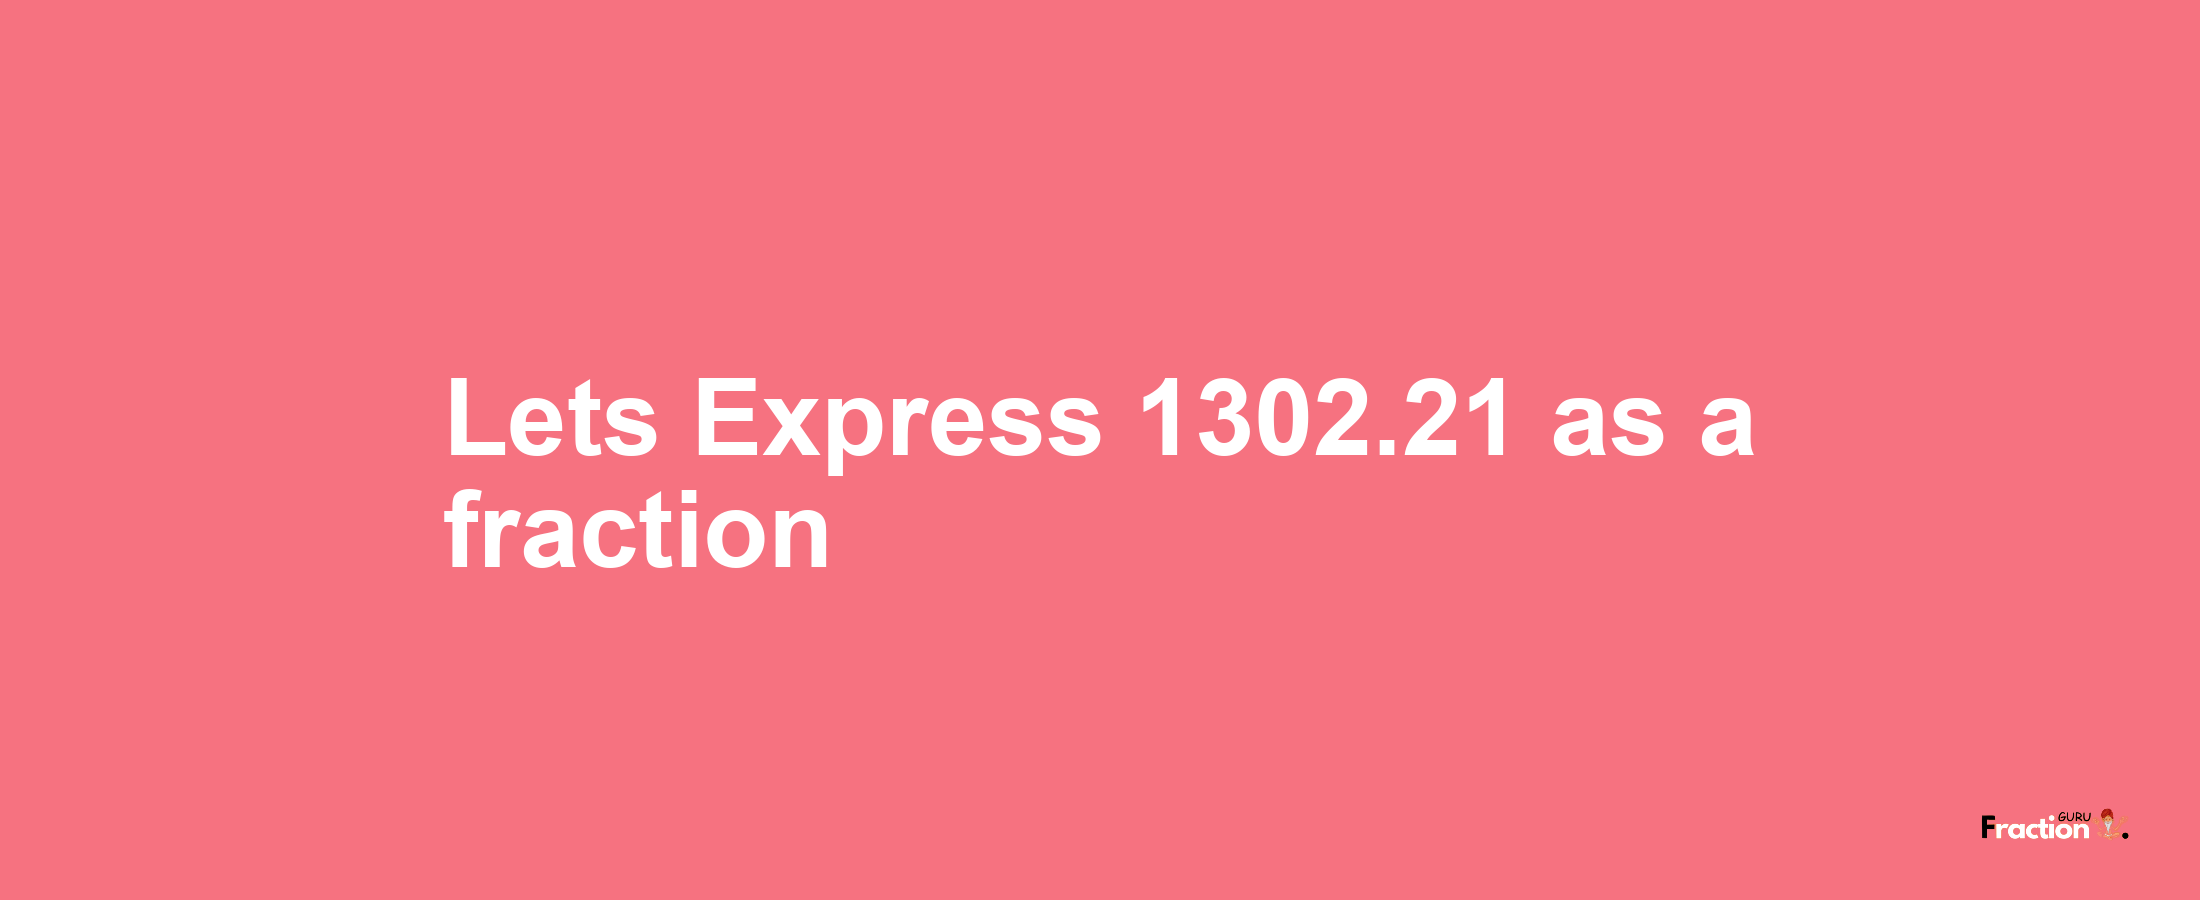 Lets Express 1302.21 as afraction